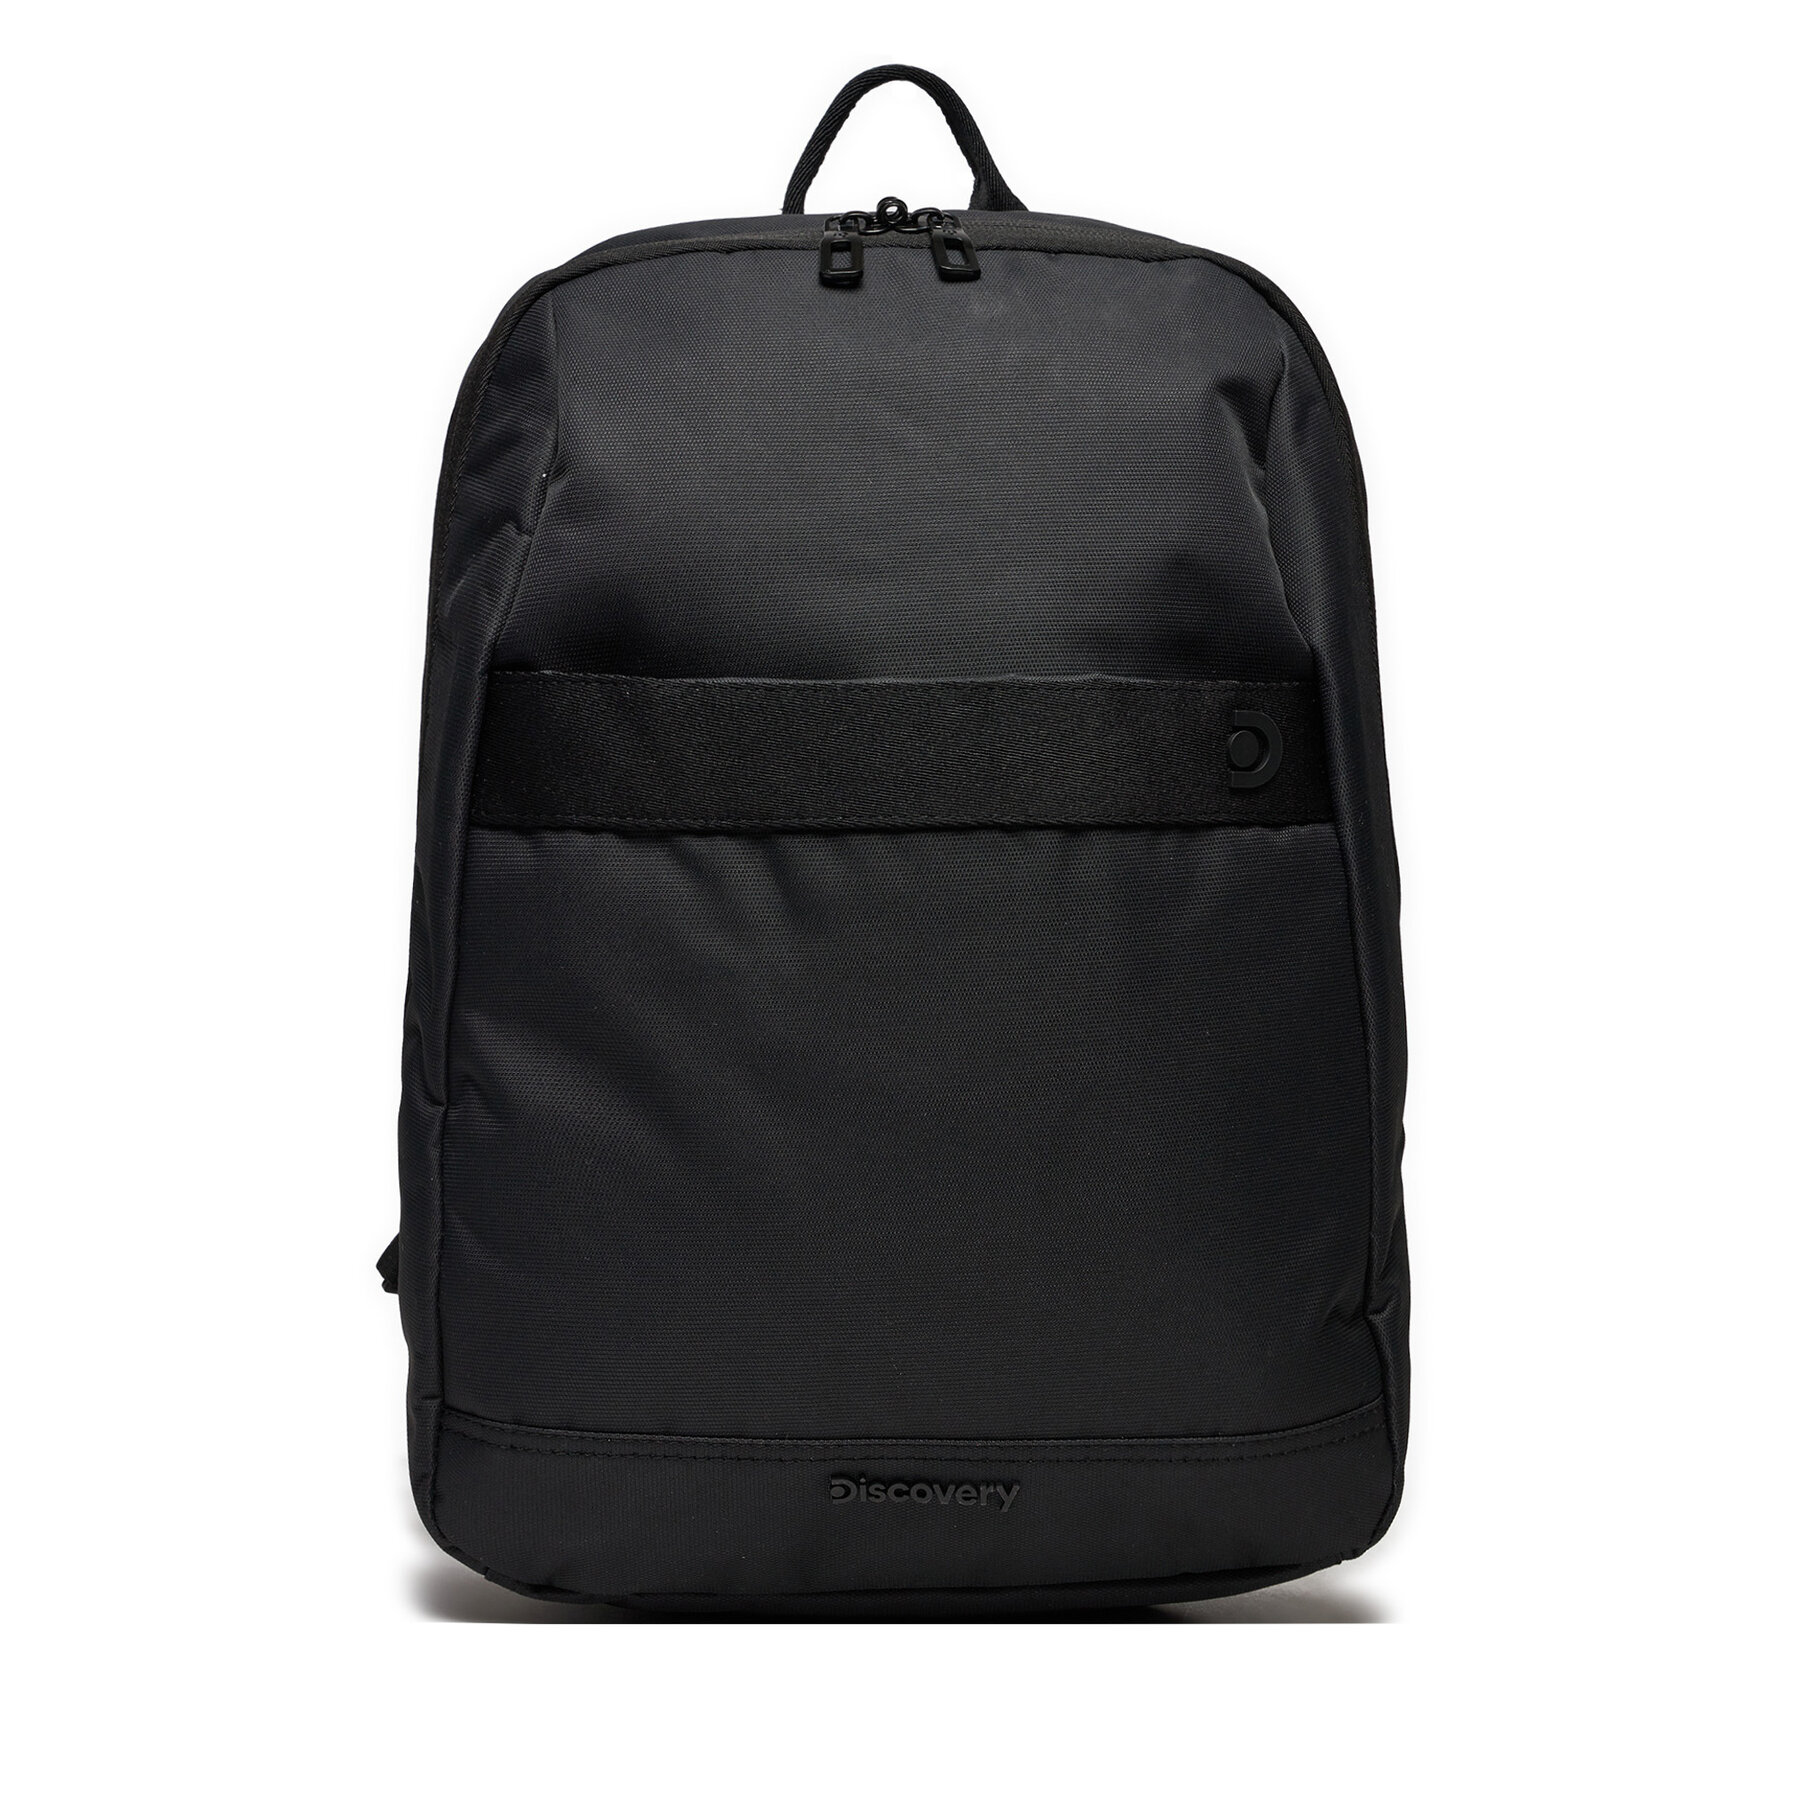 Rucksack Discovery Backpack D00940.06 Schwarz von Discovery